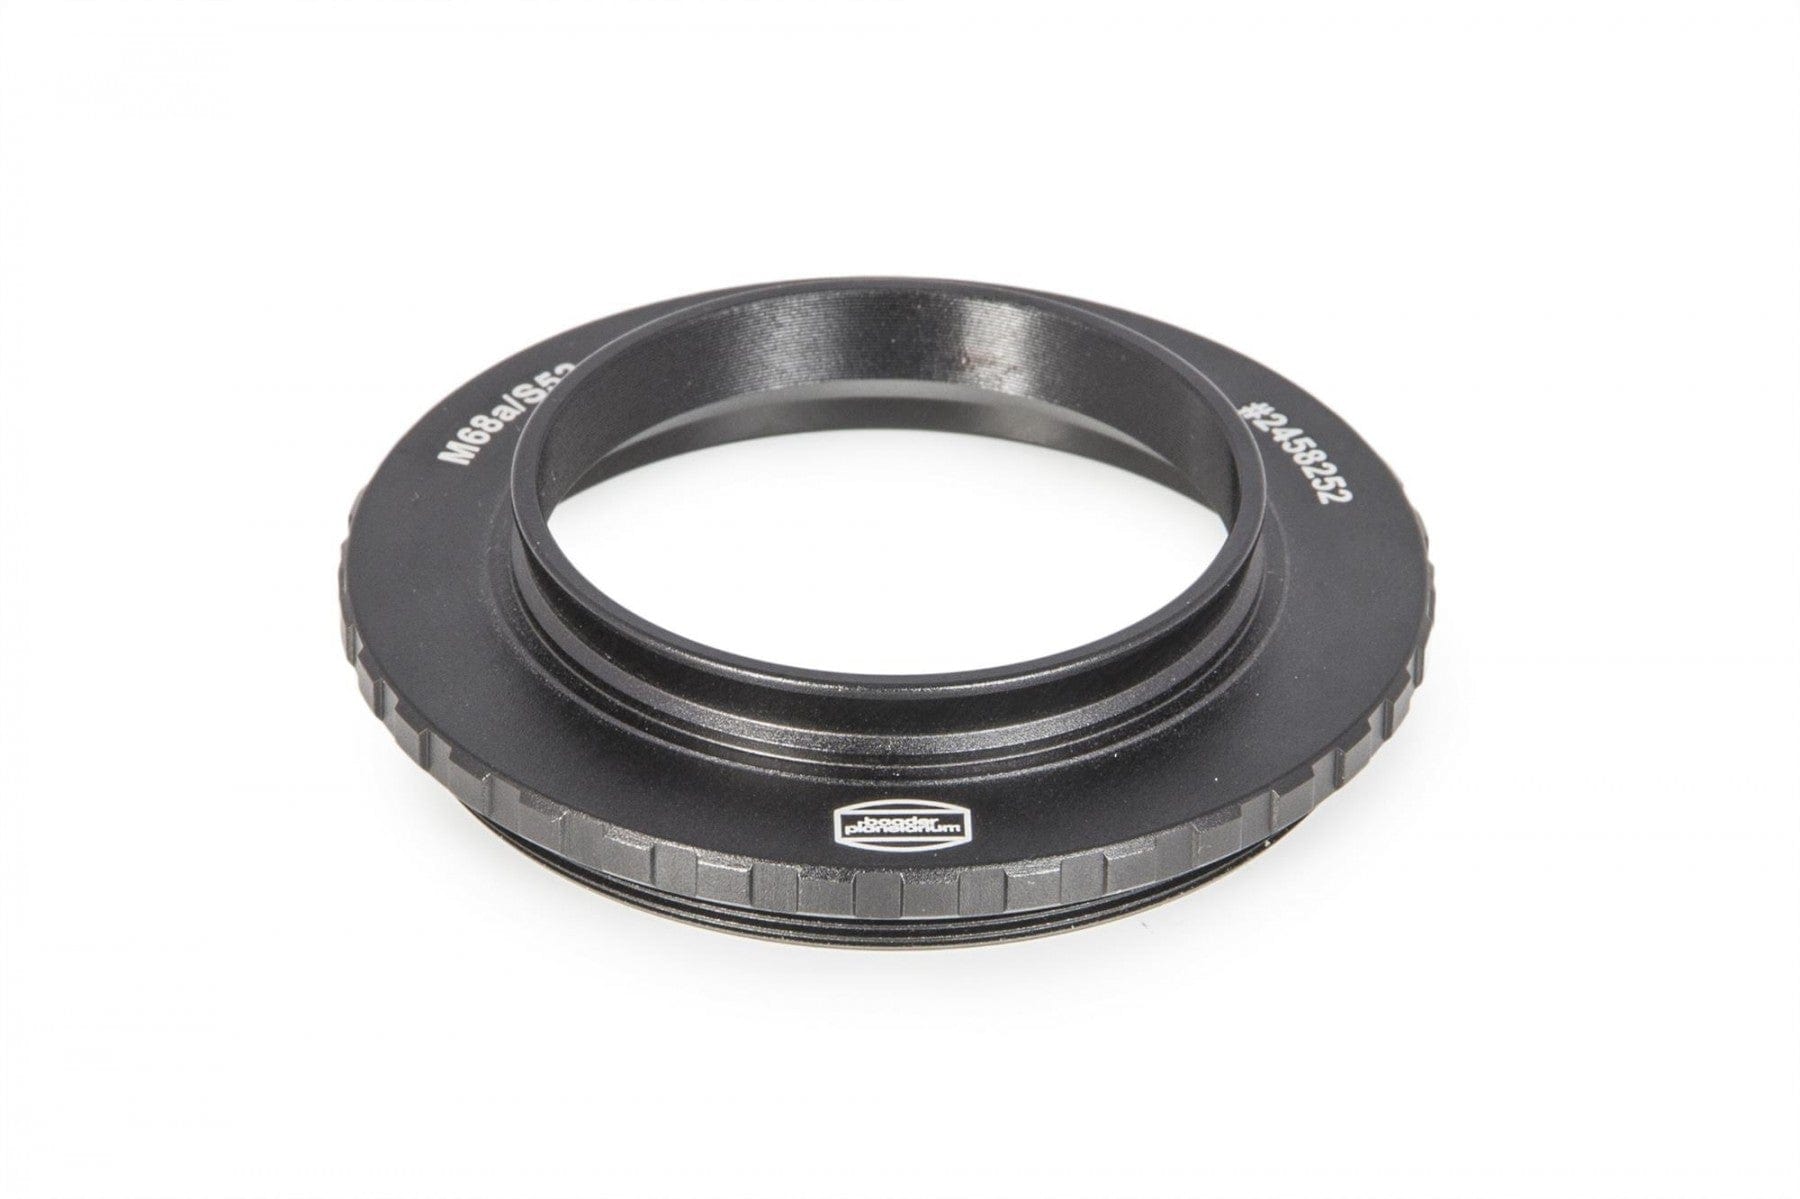 Baader Planetarium Accessory Baader Adapter M68/S52 for Baader Wide-T-Rings - 2458252